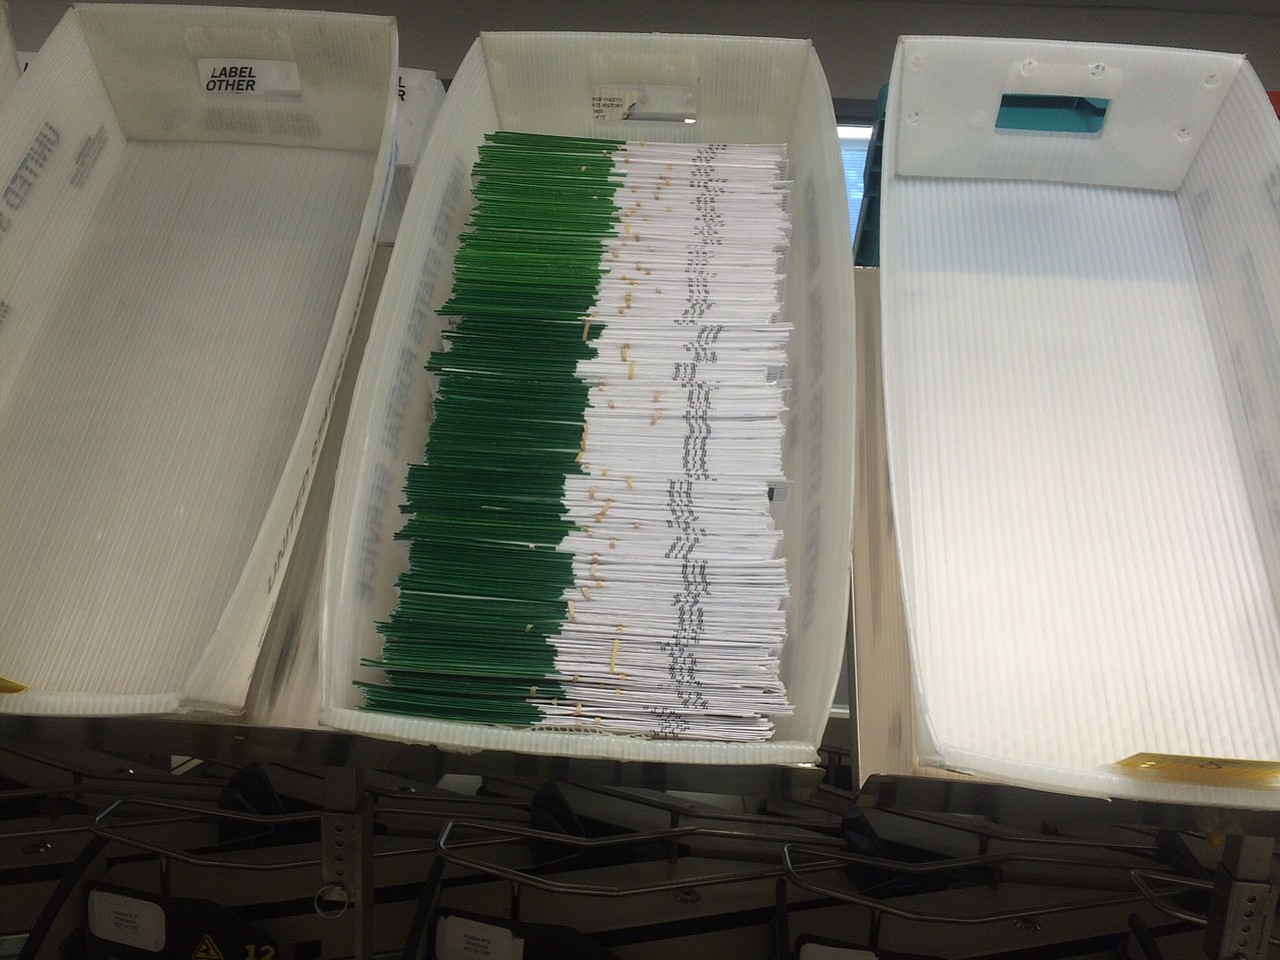 A tray full of ballots received by Clark County elections officials on Friday morning.